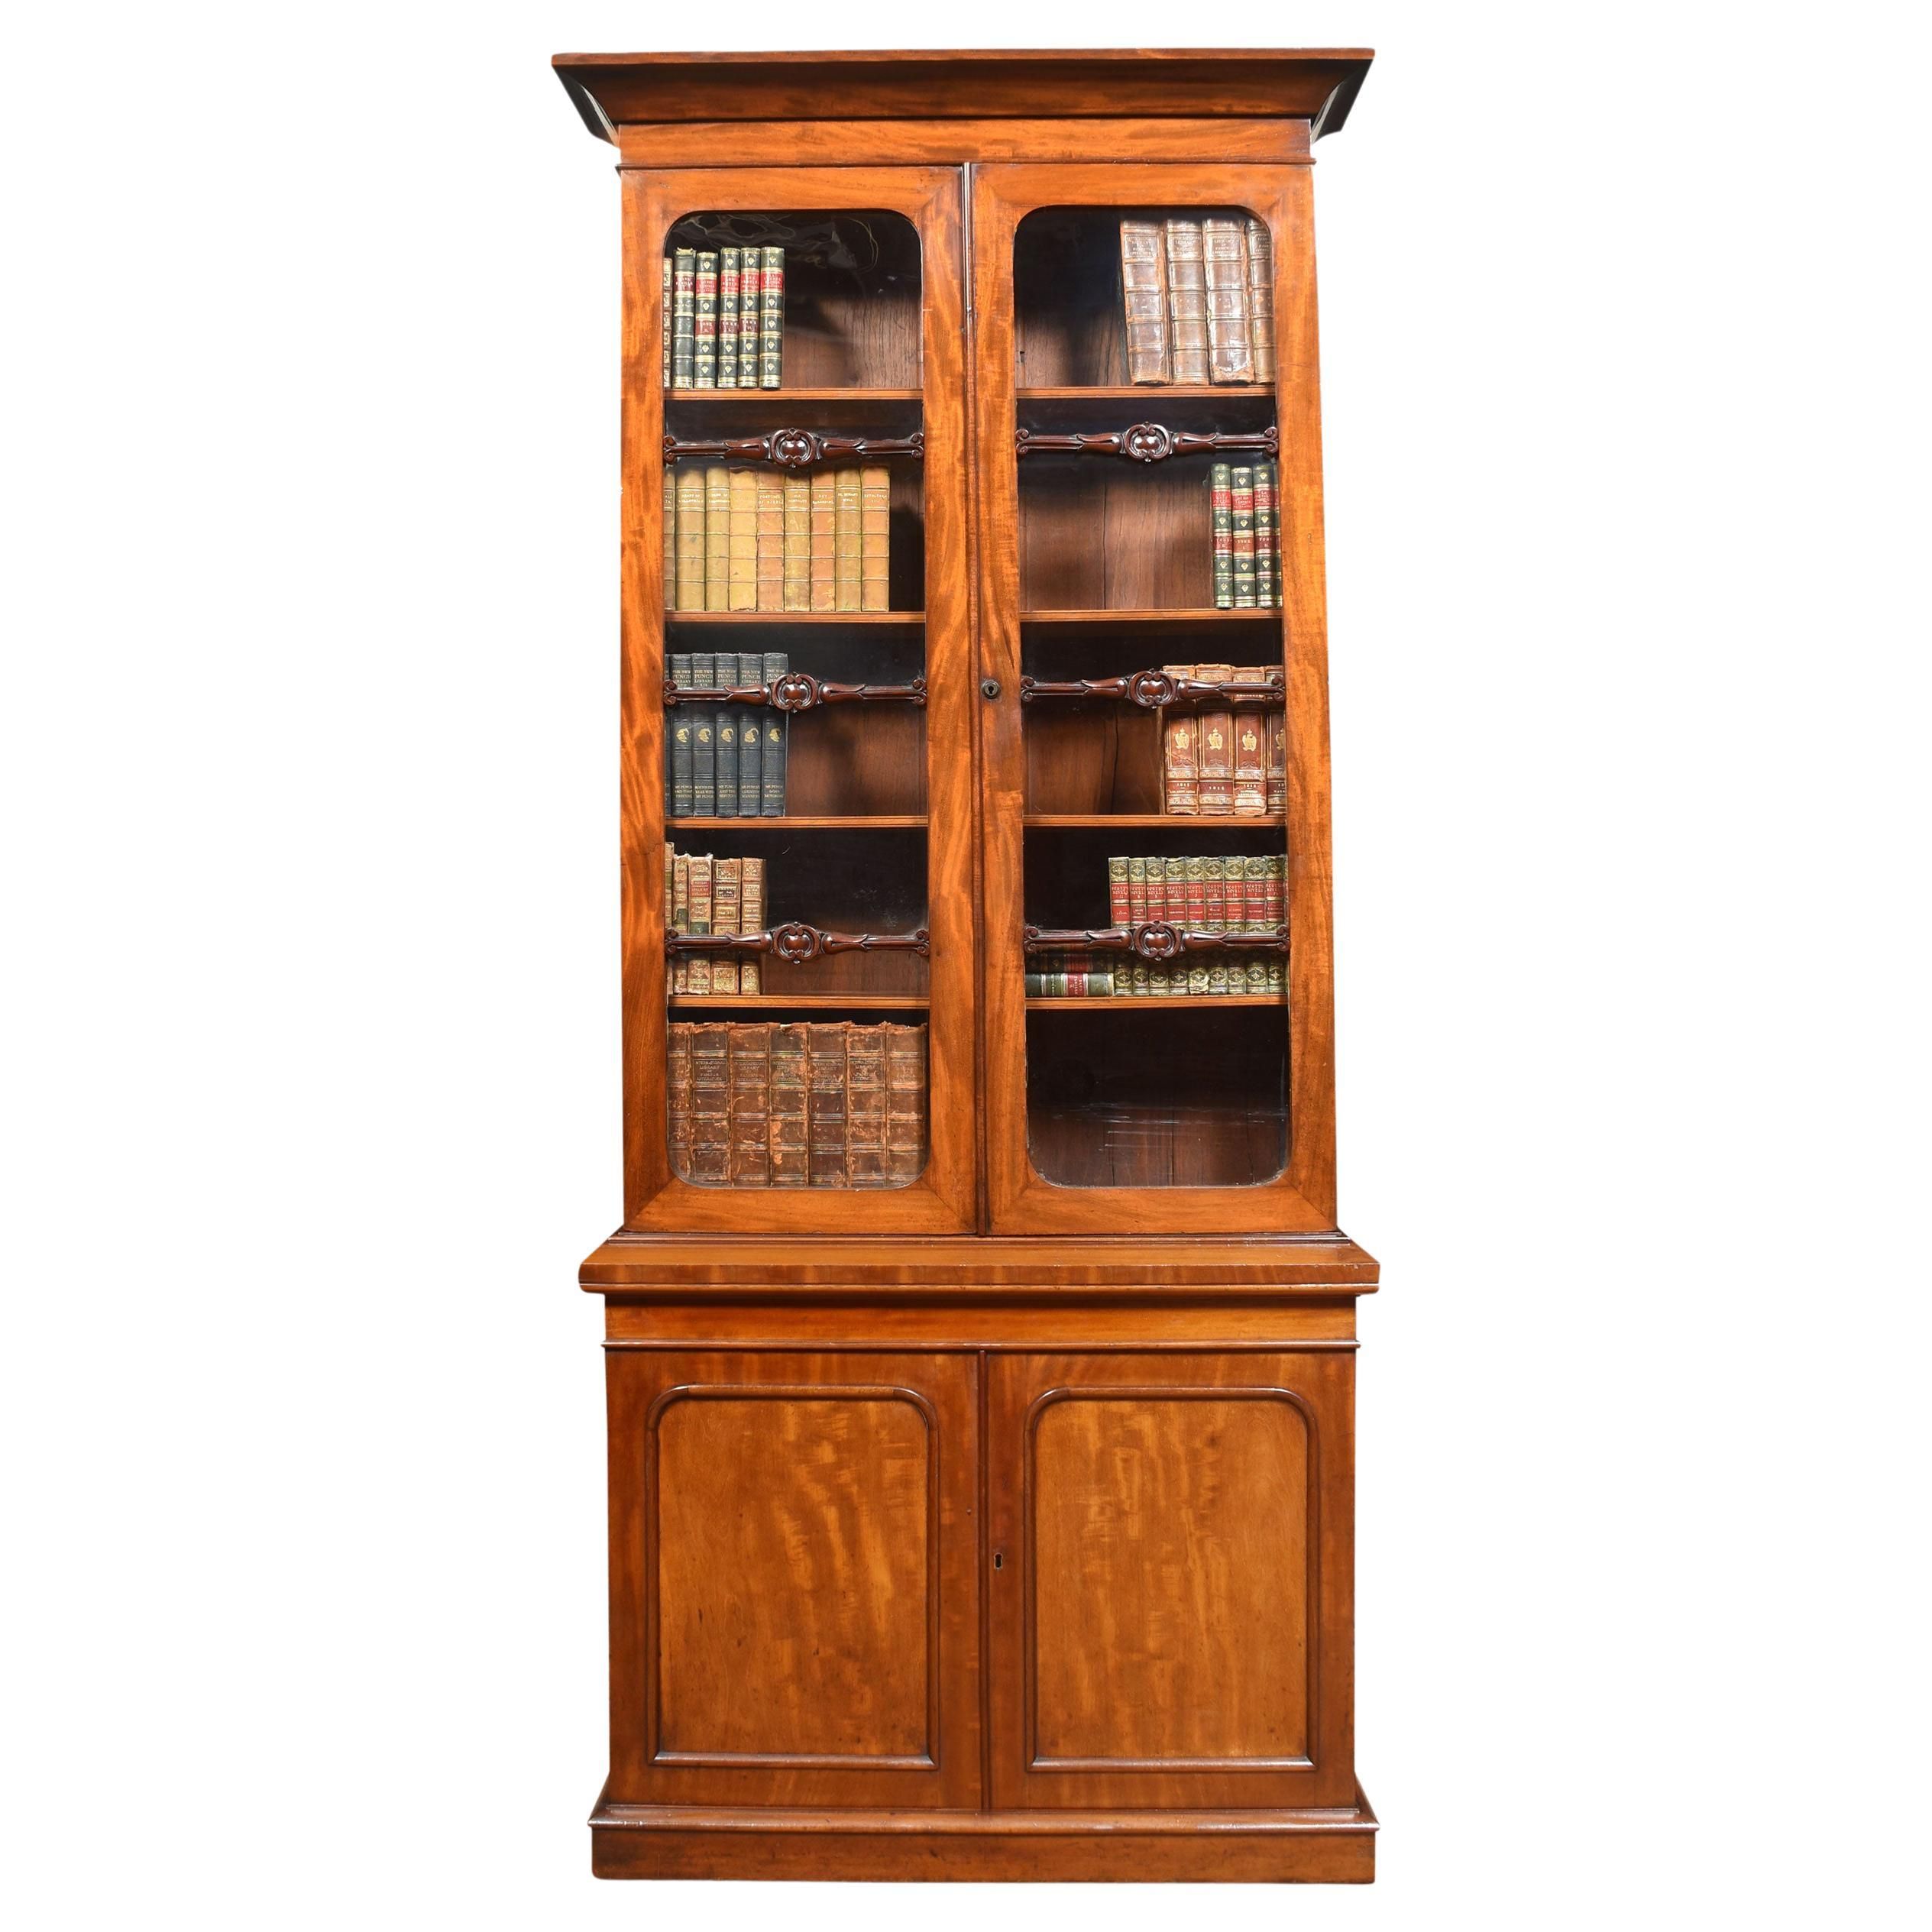 Mahogany Two Door Narrow Bookcase For Sale At 1stdibs | Narrow Bookcase  With Doors, Narrow Mahogany Bookcase, Narrow Bookcases With Doors Within Two Door Bookcases (View 13 of 15)